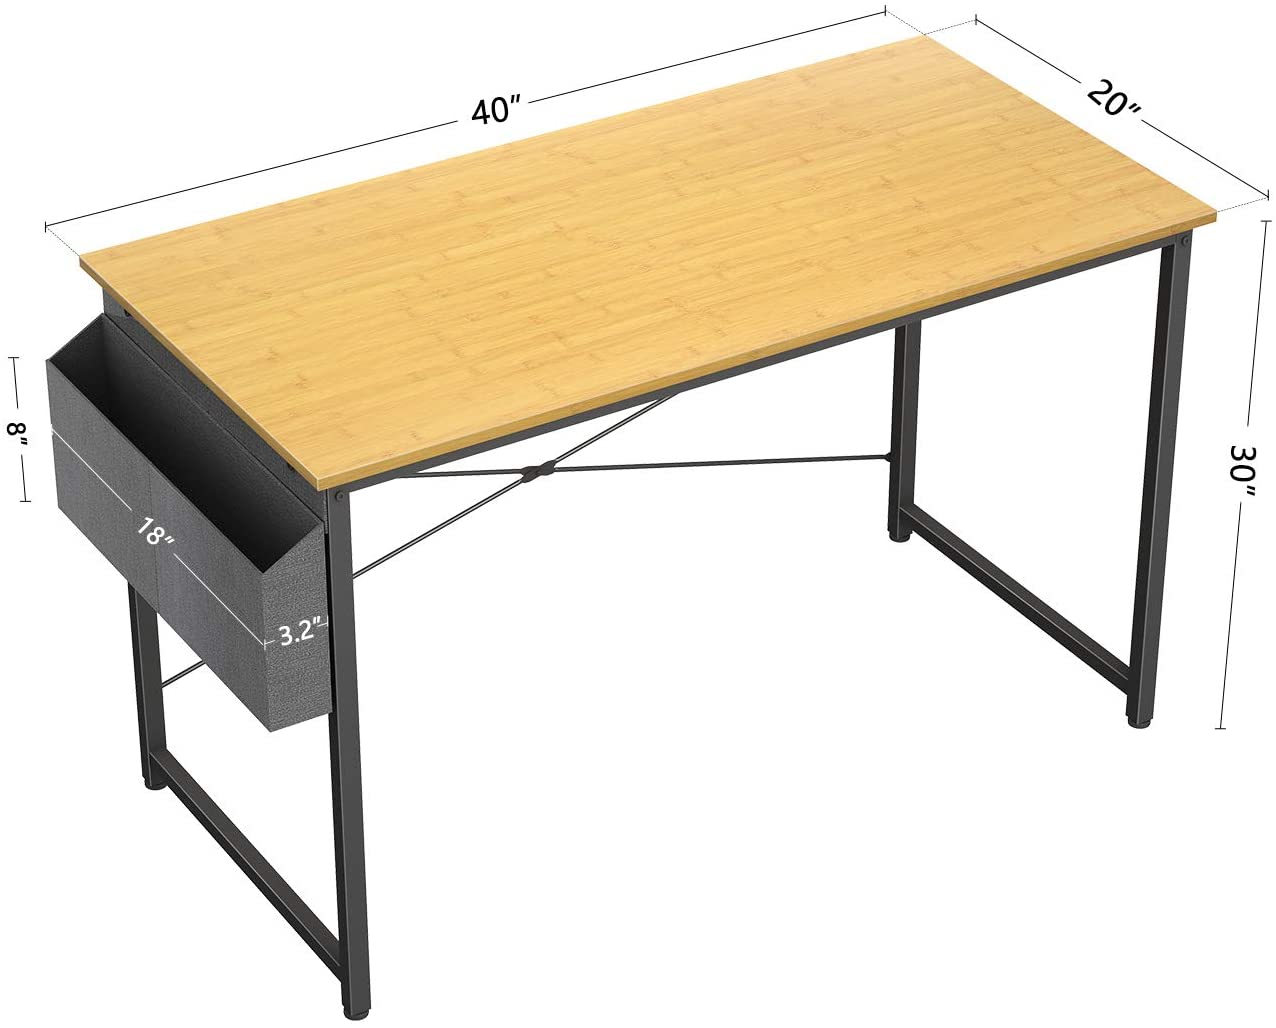 Study Tables : 40 inch Home Office Writing Study Desk with Storage Bag